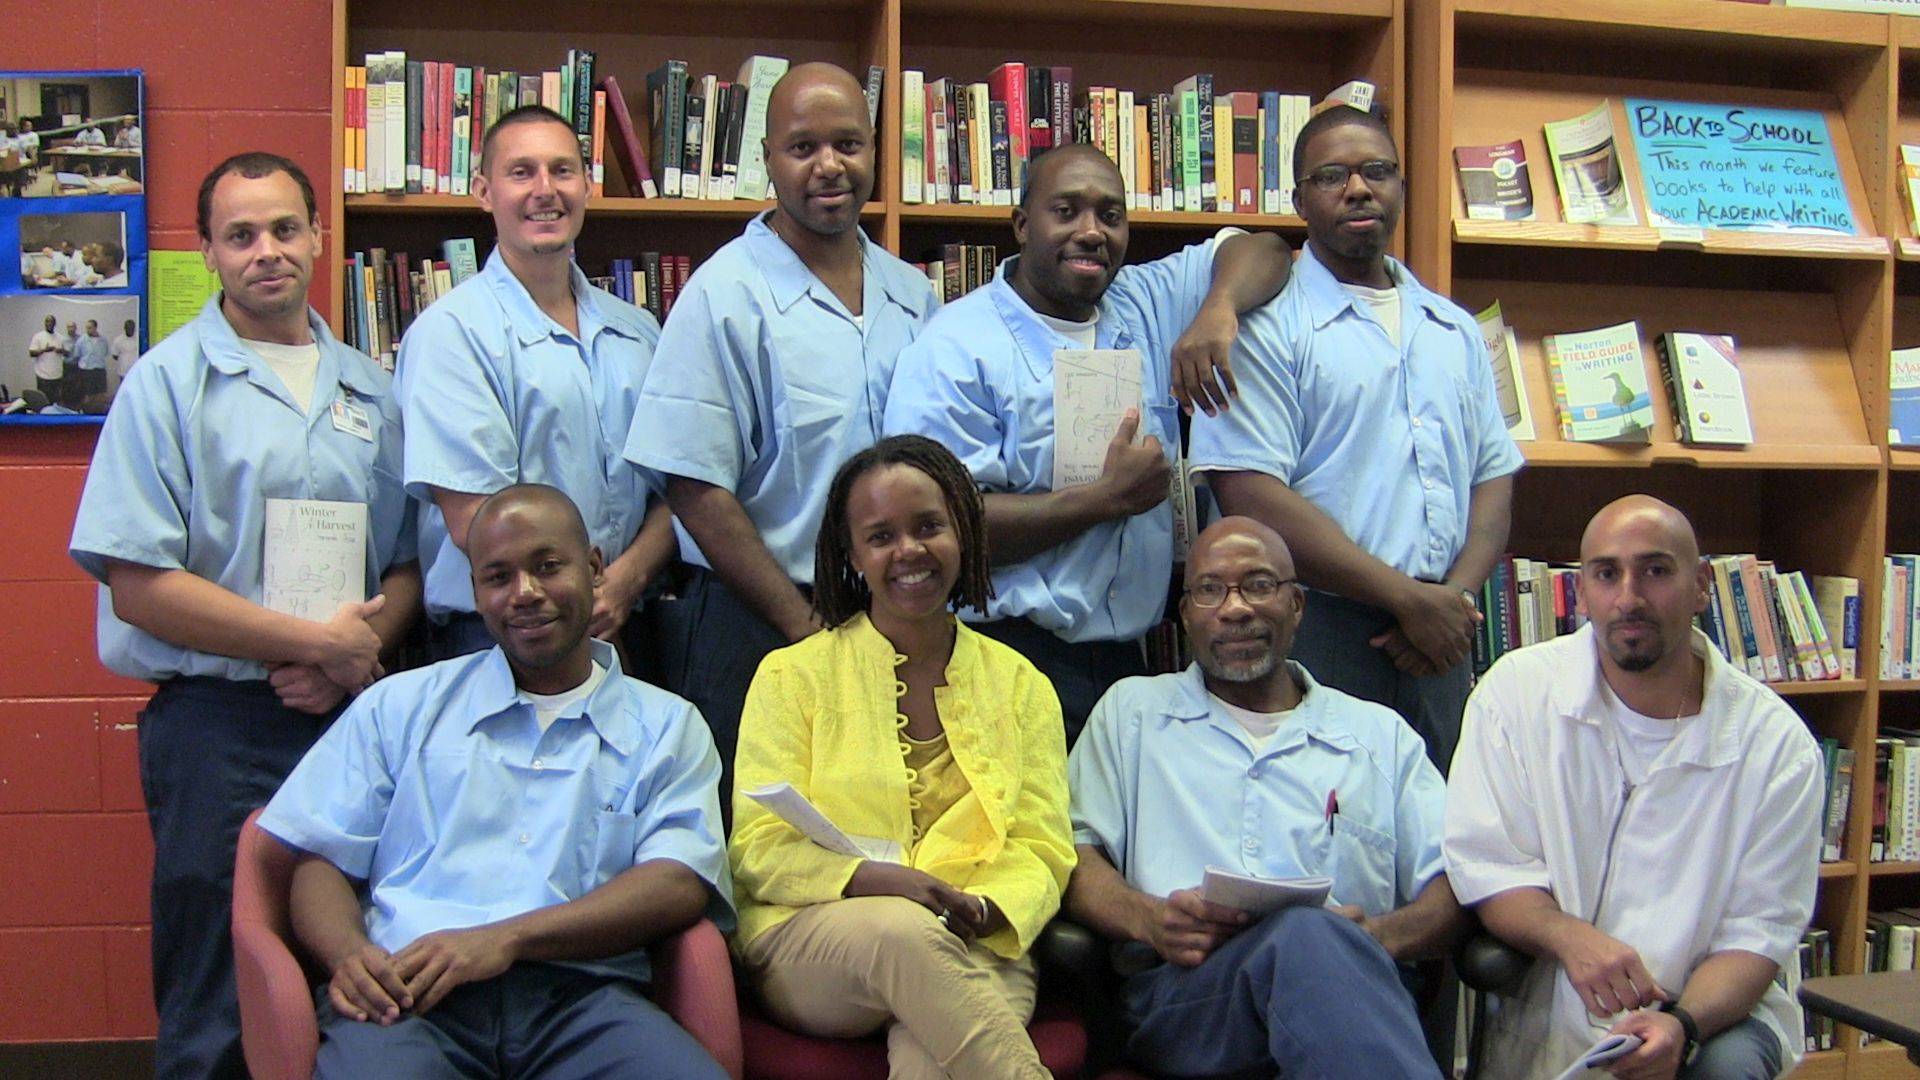 Giving “prominence to the voices of incarcerated people”